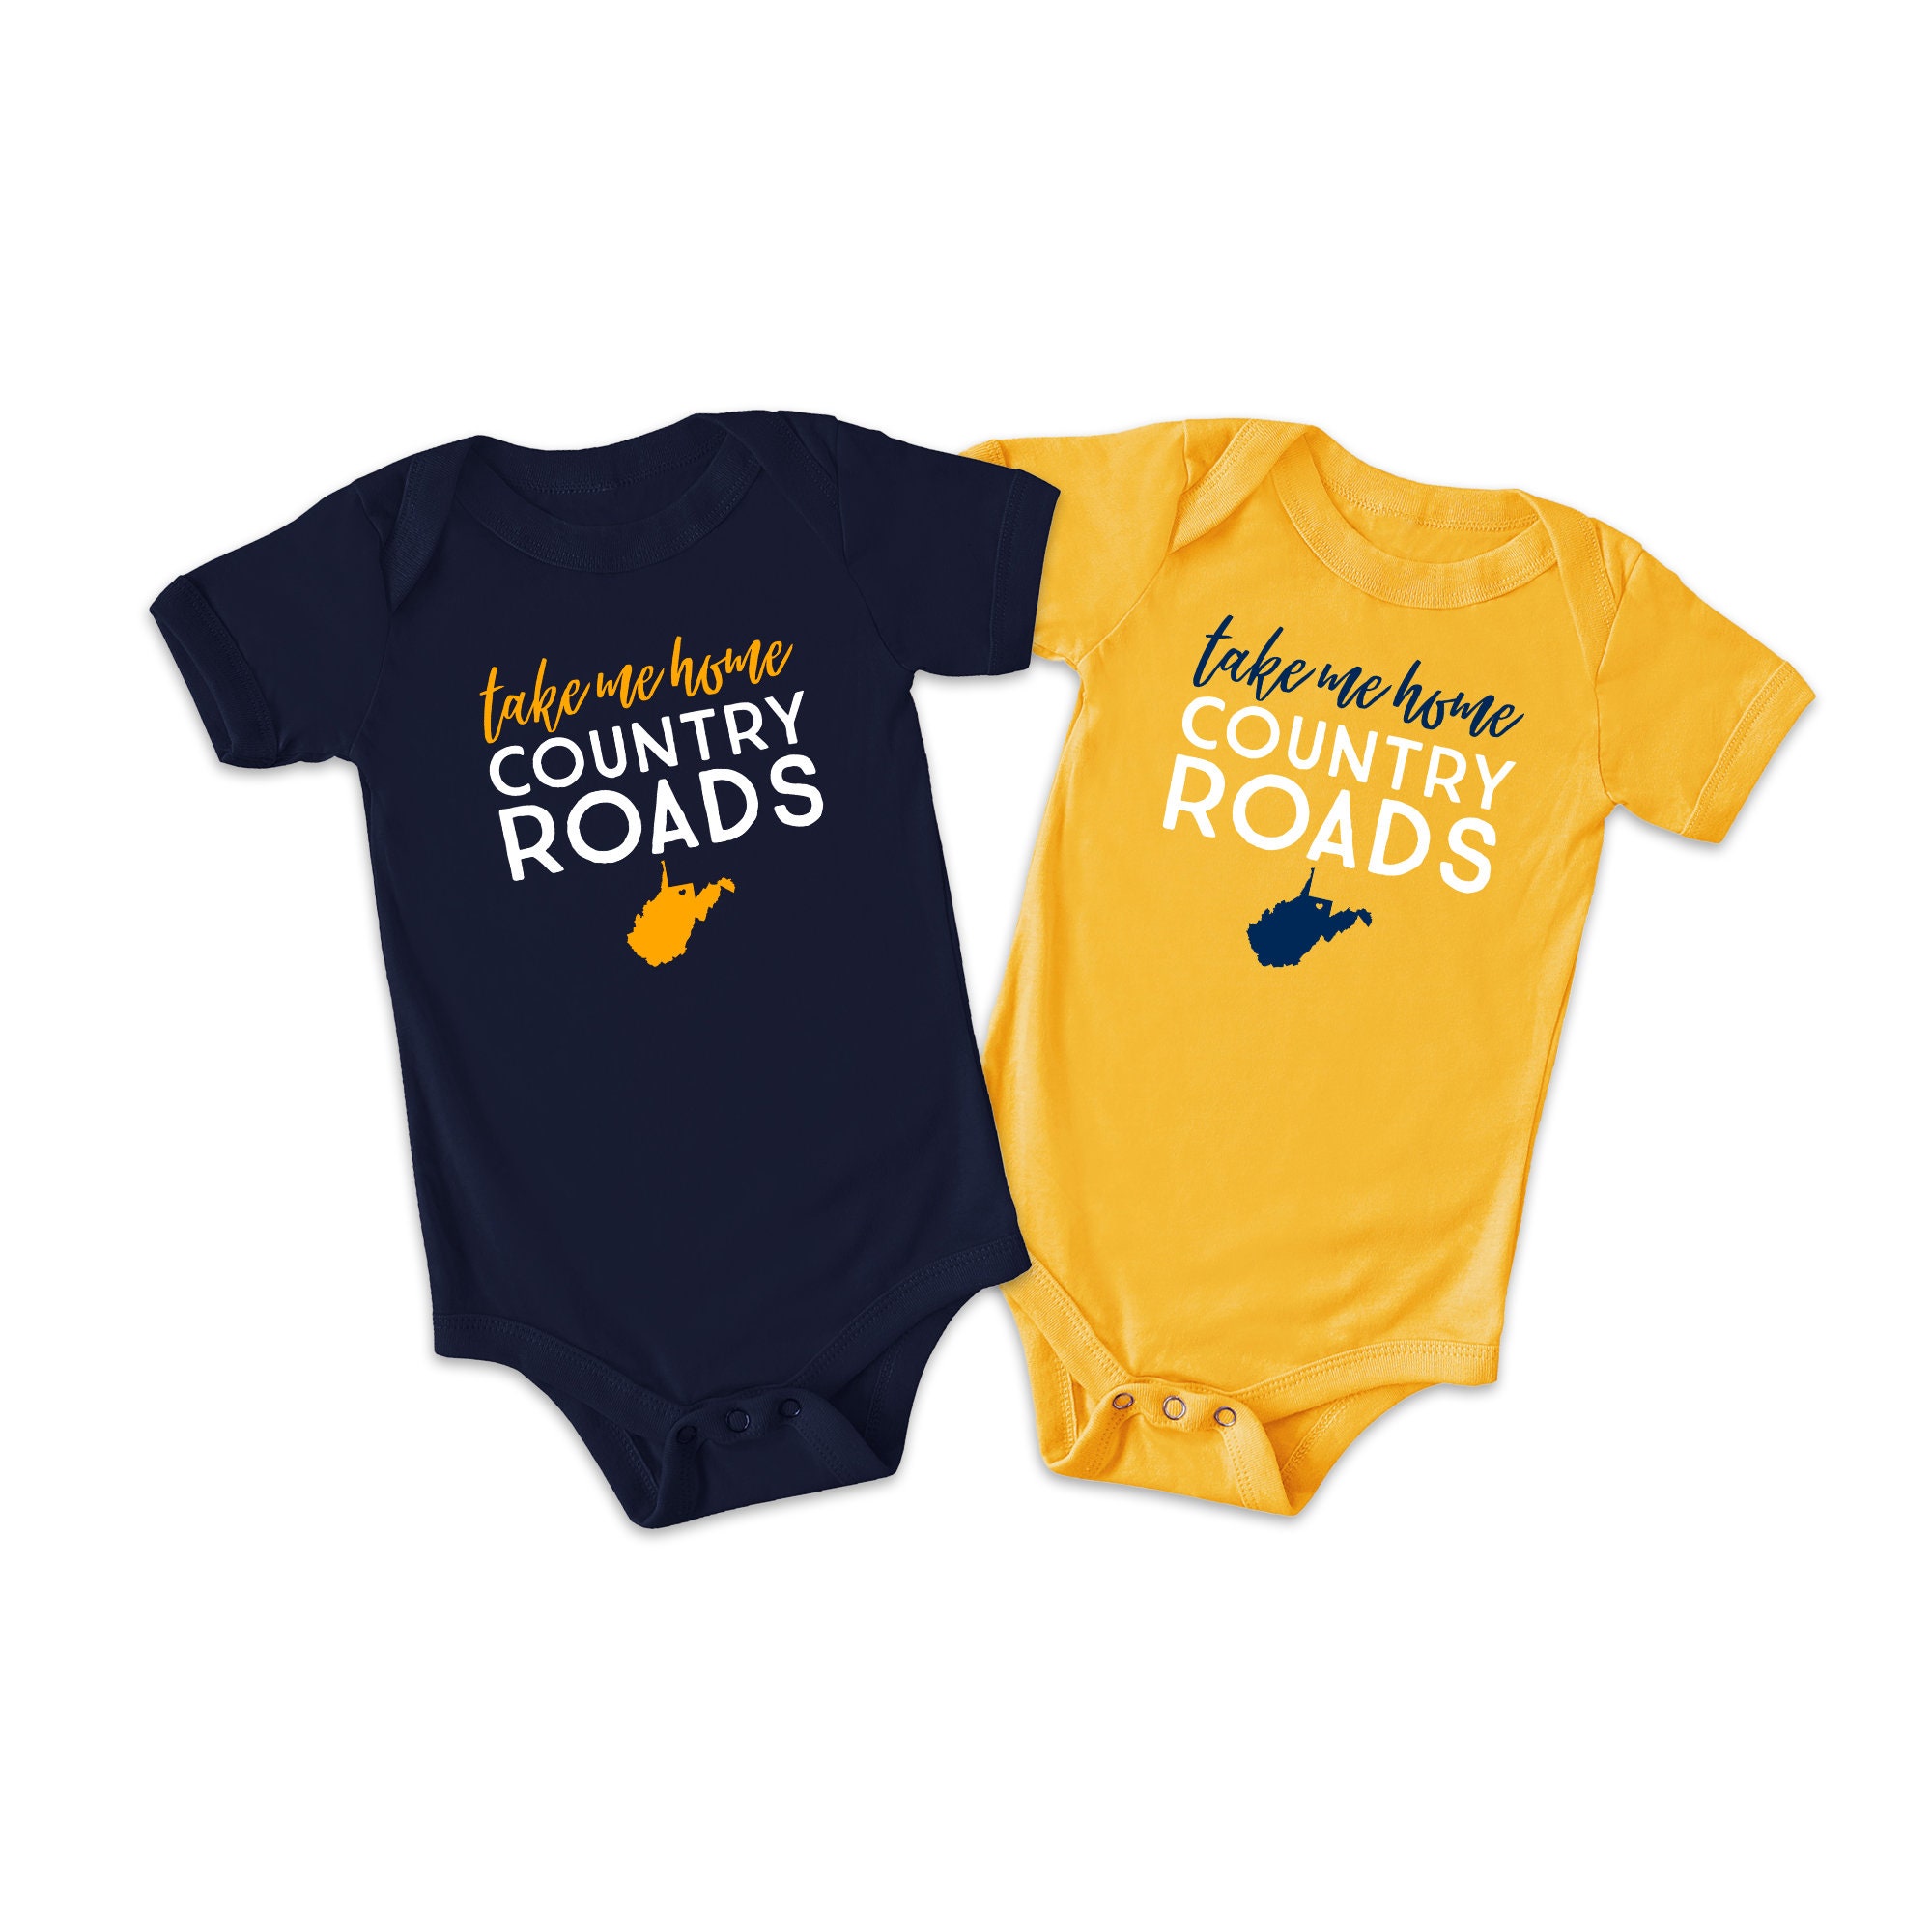 Creative Knitwear West Virginia University Baby and Toddler Polo Shirt 